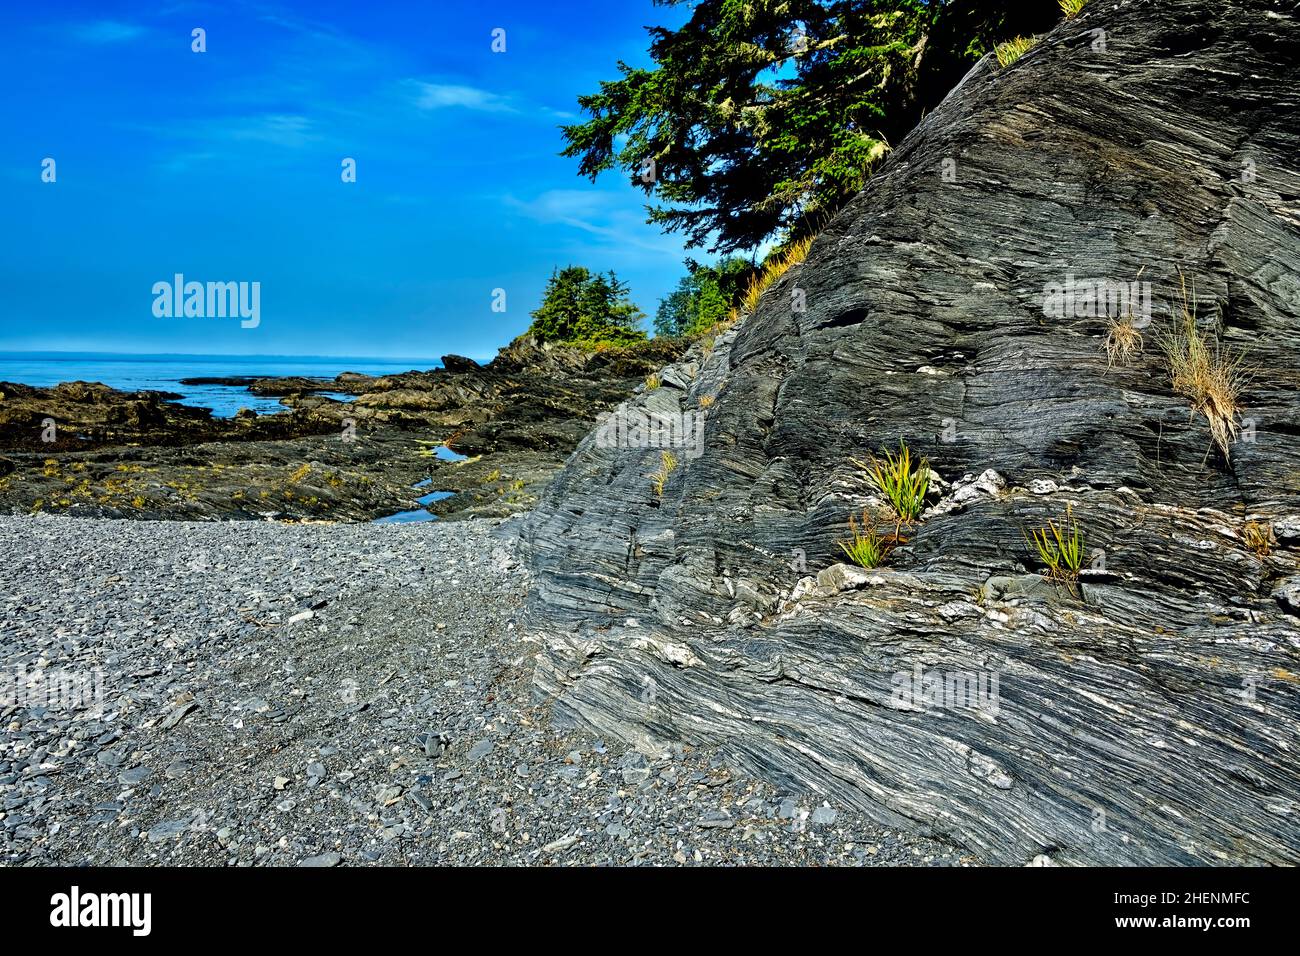 A landscape image of a rocky beach on the rugged west coast of Vancouver Island looking toward the Pacific Ocean. Stock Photo